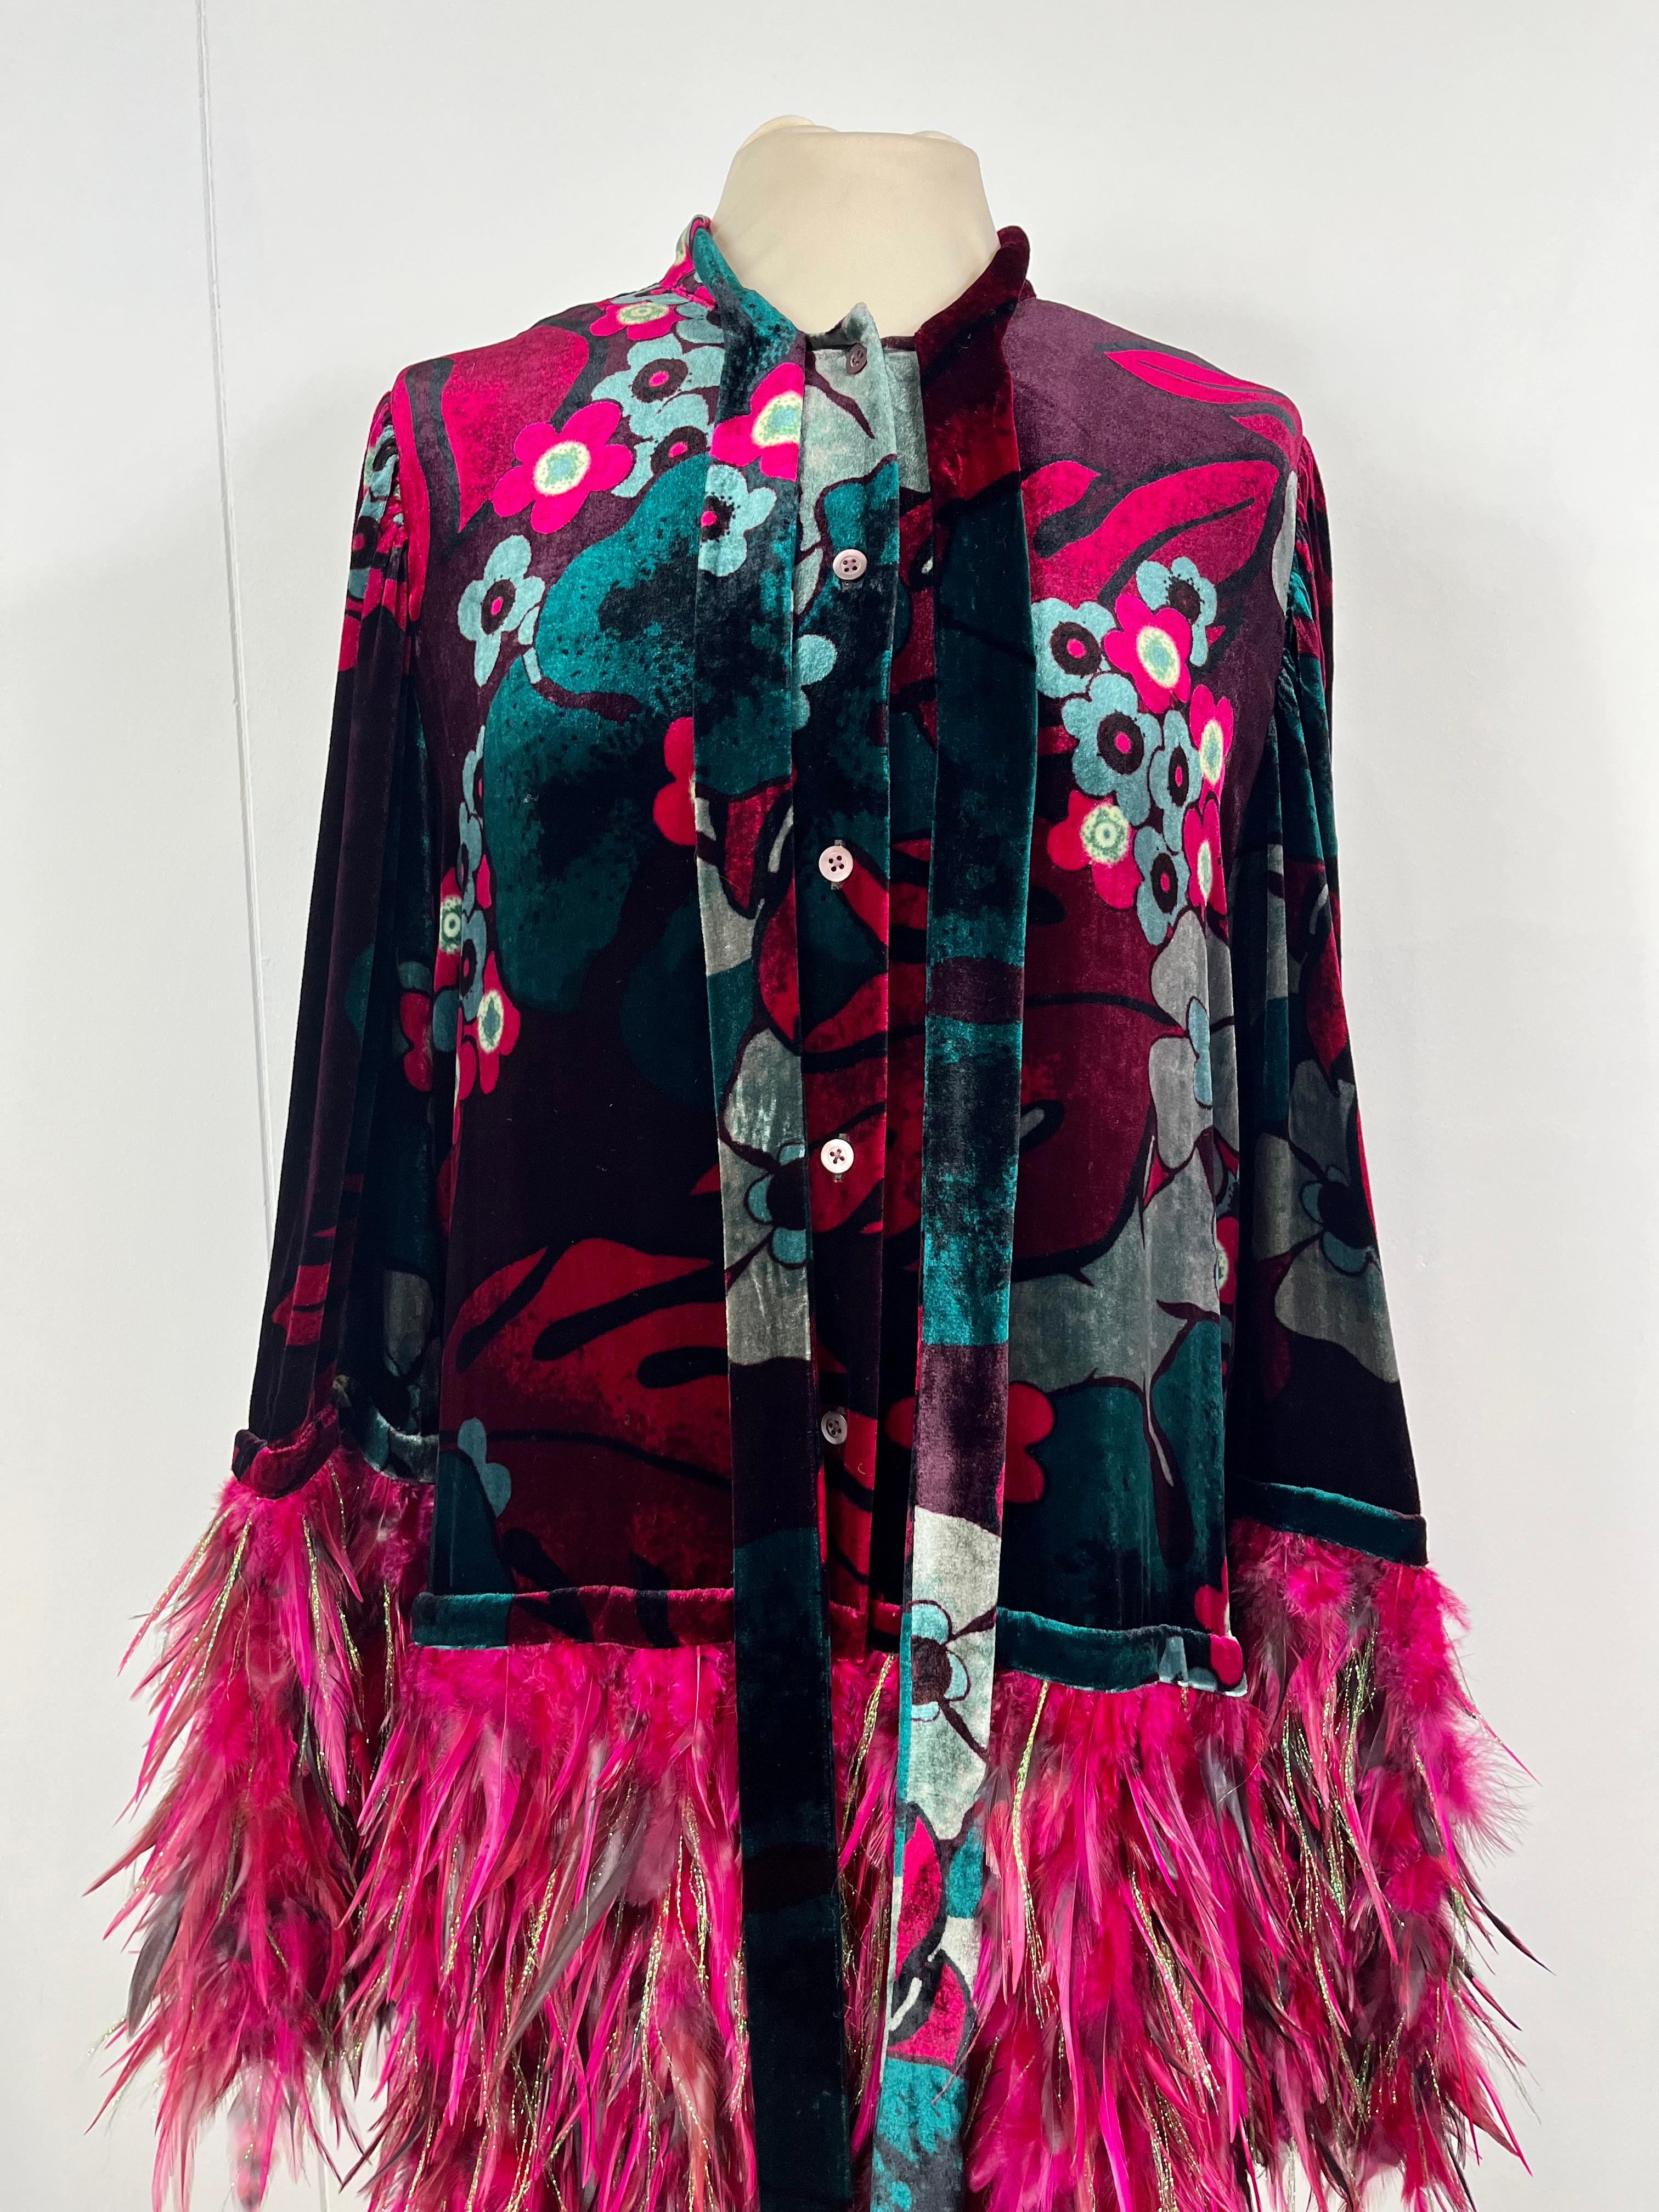 Dries Van Noten Dress.
Coming from Autumn Winter 2020 collection.
Featuring amazing floral pattern and feathers details.
In viscose and silk. Velvet feeling.
Very elegant and eccentric.
It can be styled both as a dress or an overcoat.
Size 40